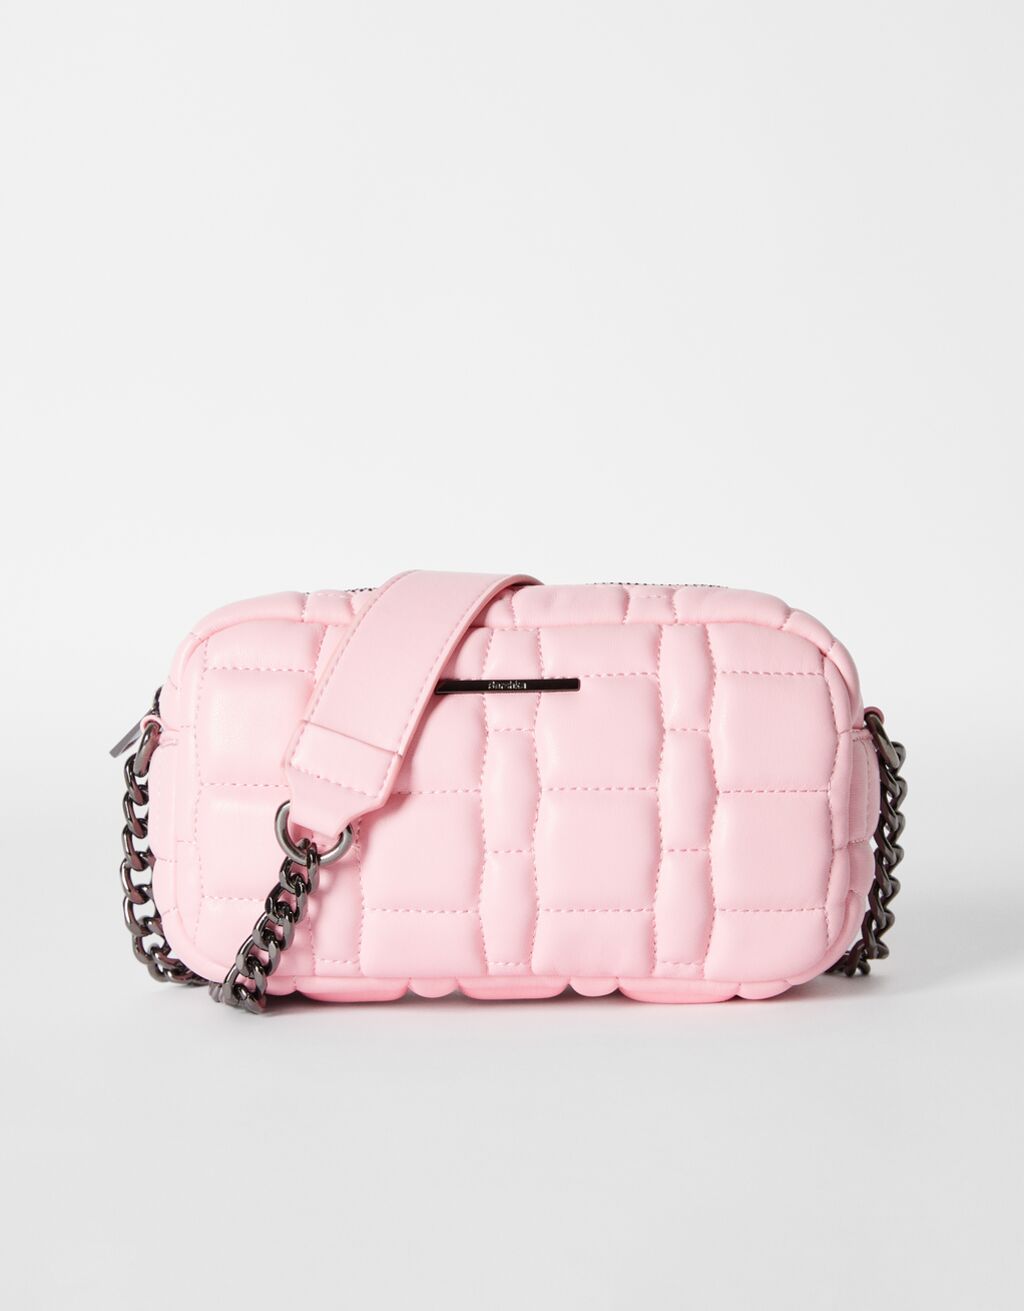 Quilted handbag with chain strap